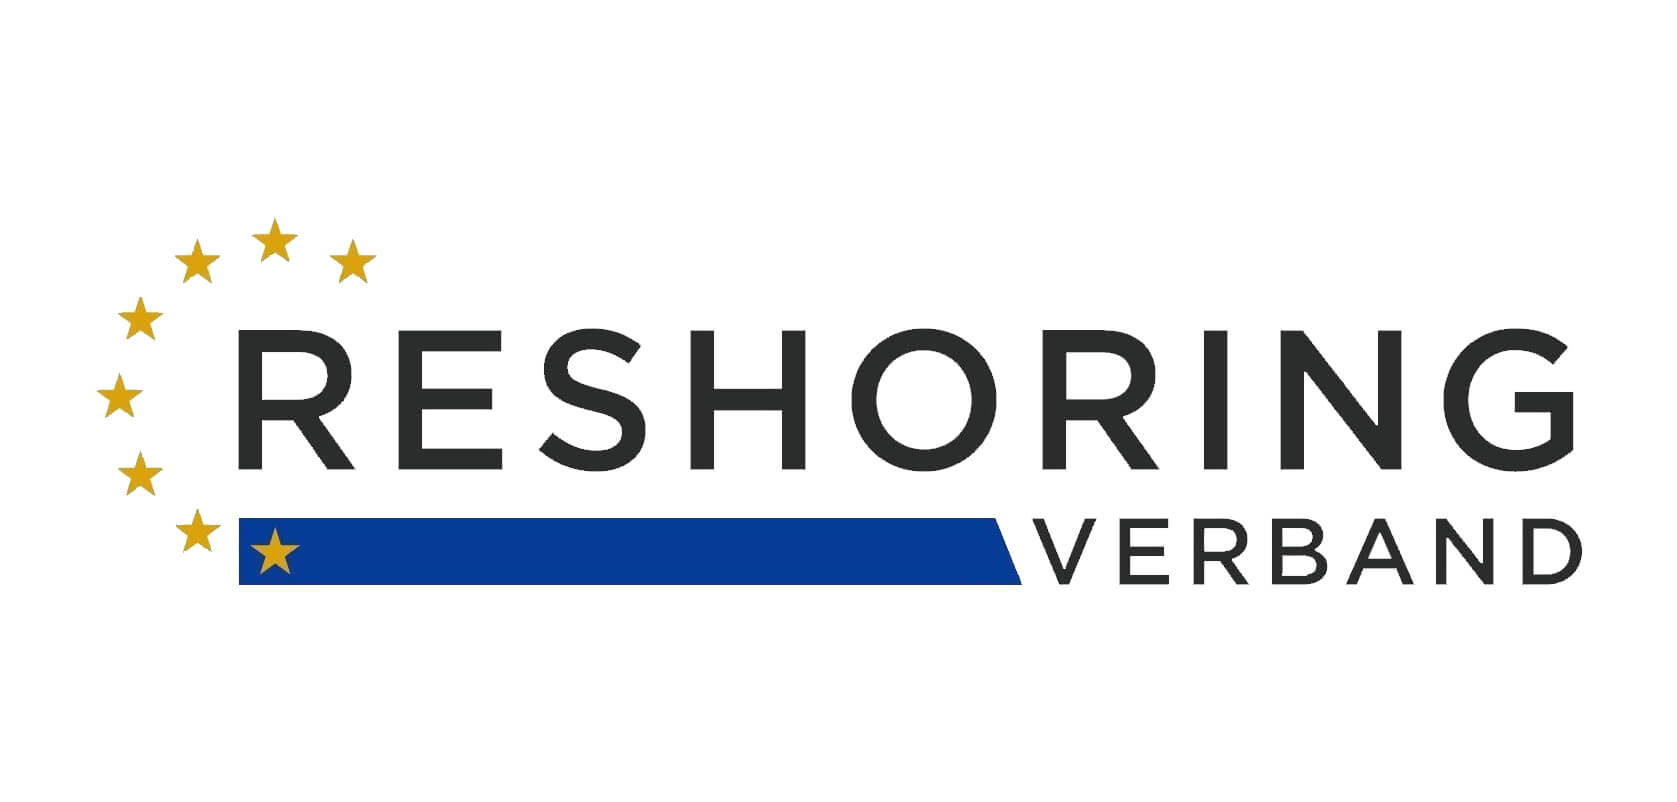 Reshoring Verband - Events, News & Industry Updates in Germany.